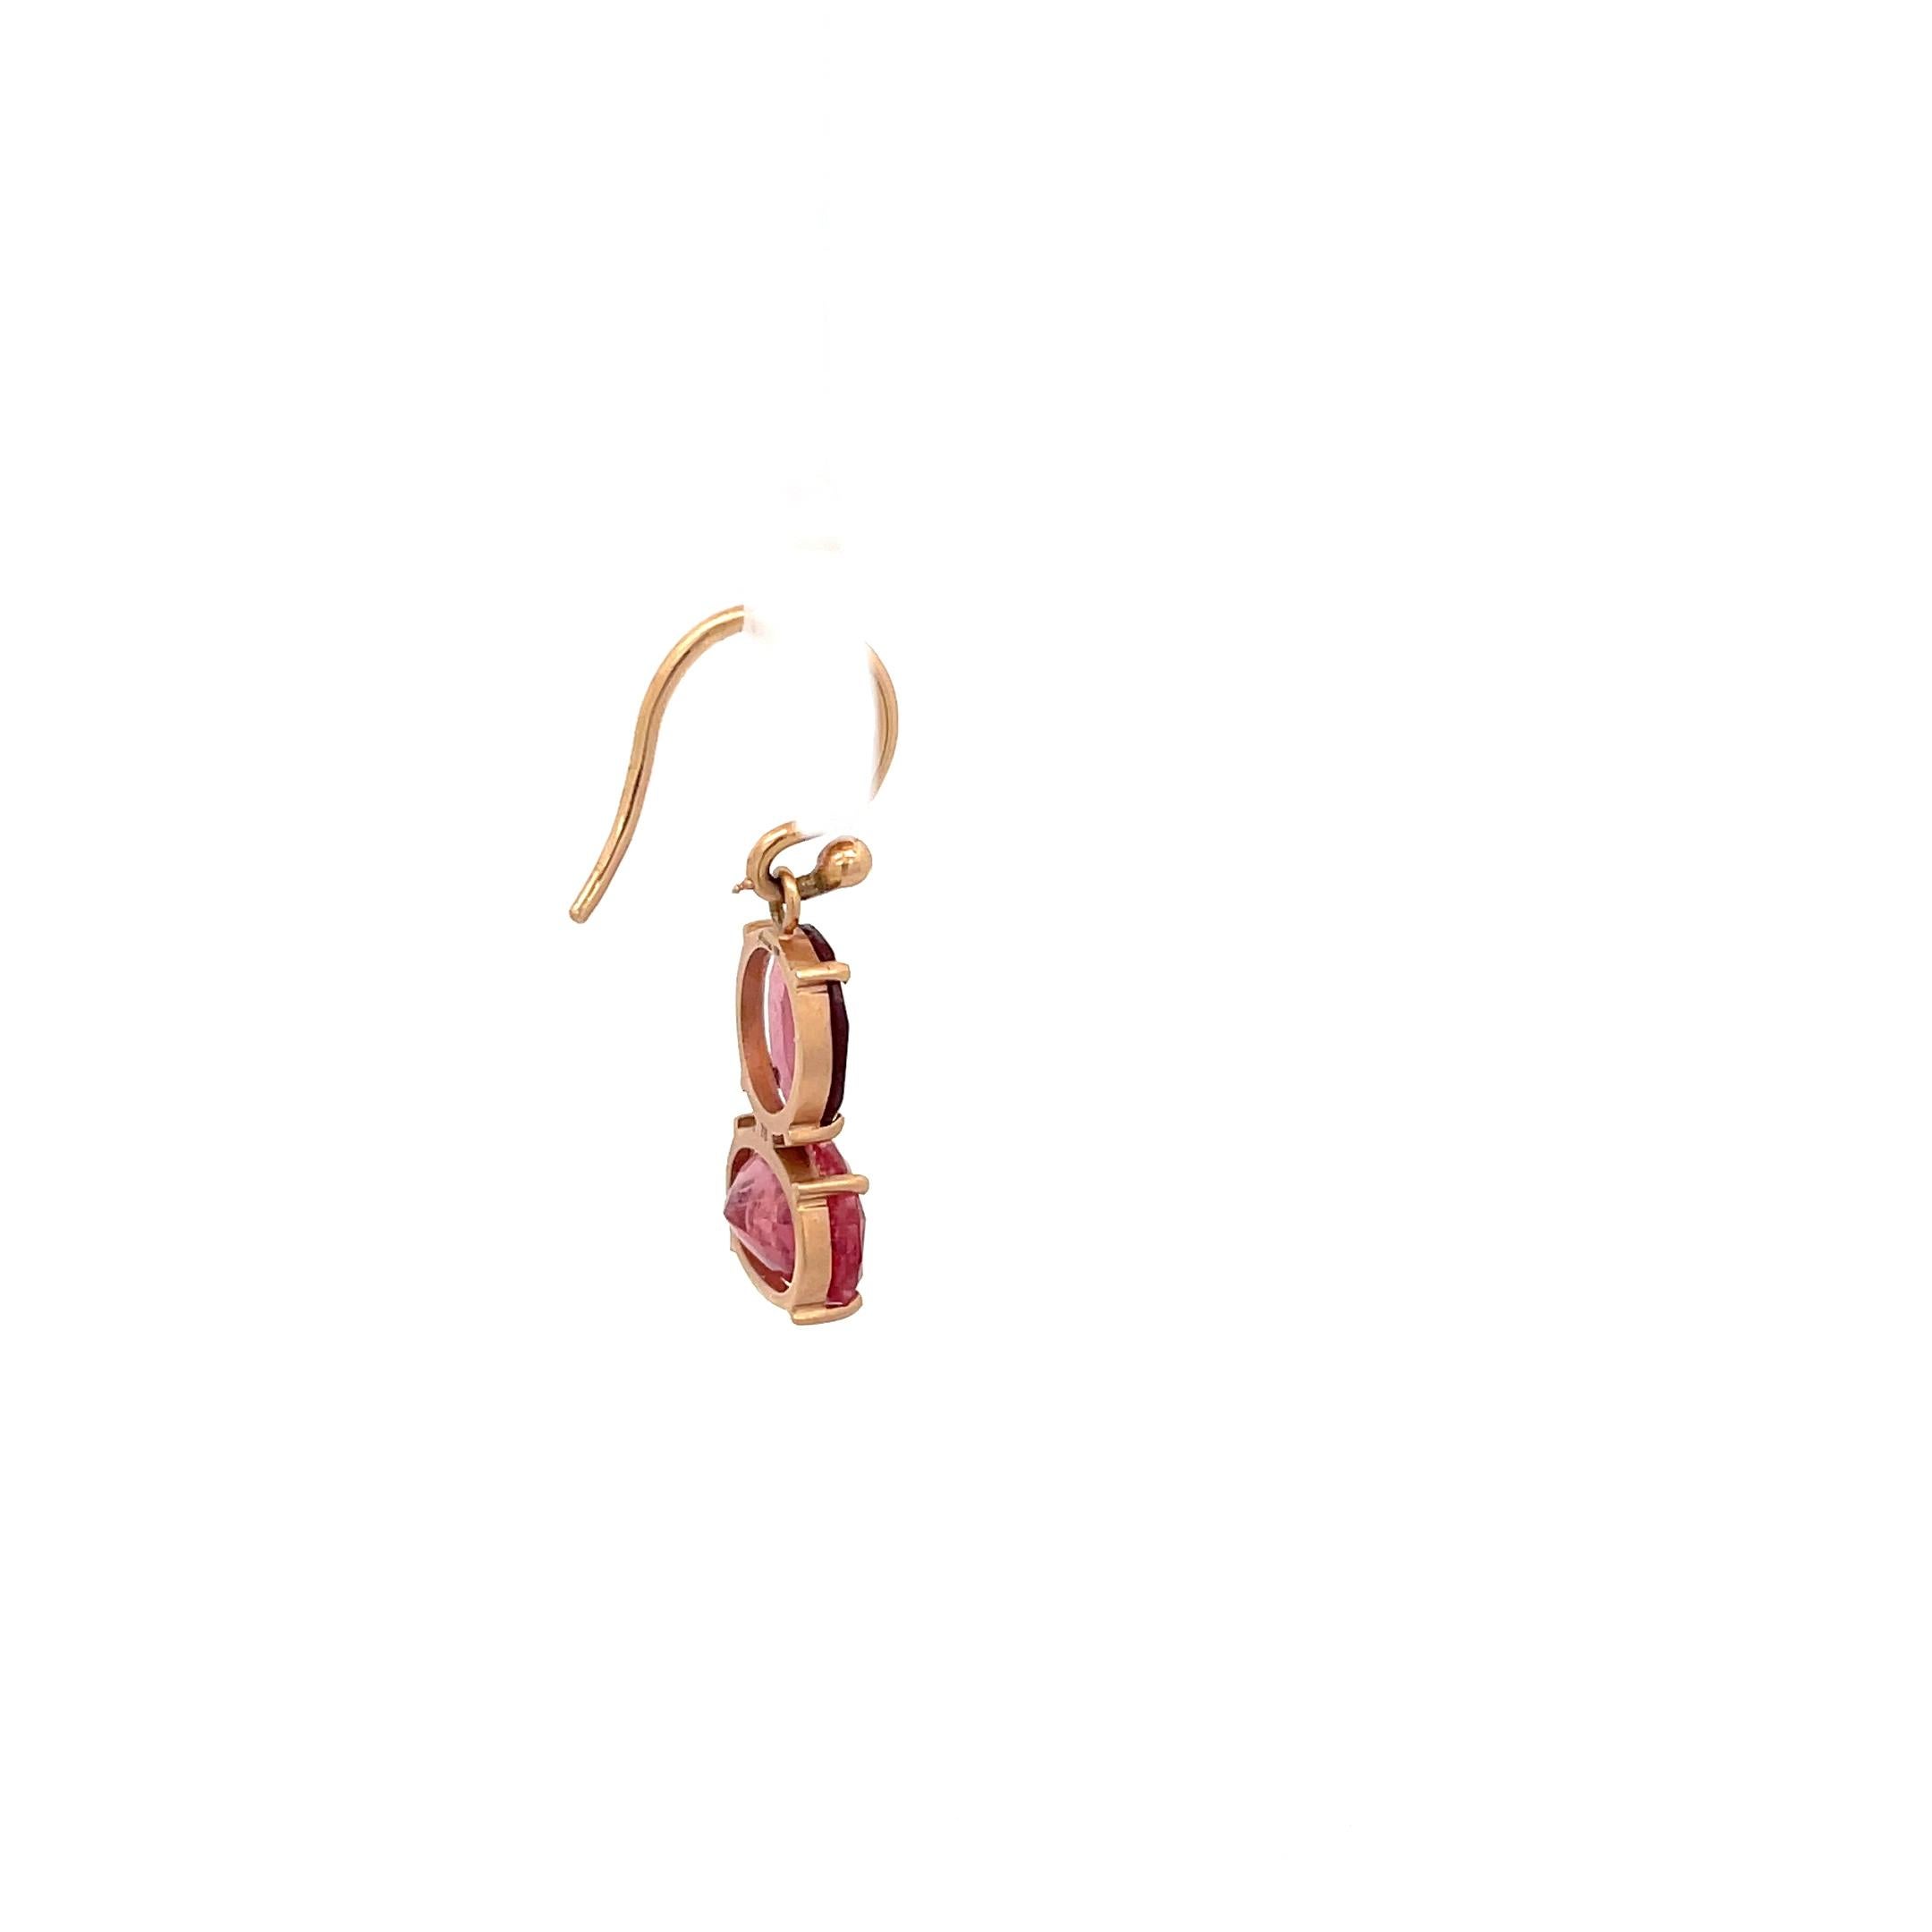 Irene Neuwirth Double Tourmaline Single Earring 18K Rose Gold In Excellent Condition For Sale In Dallas, TX